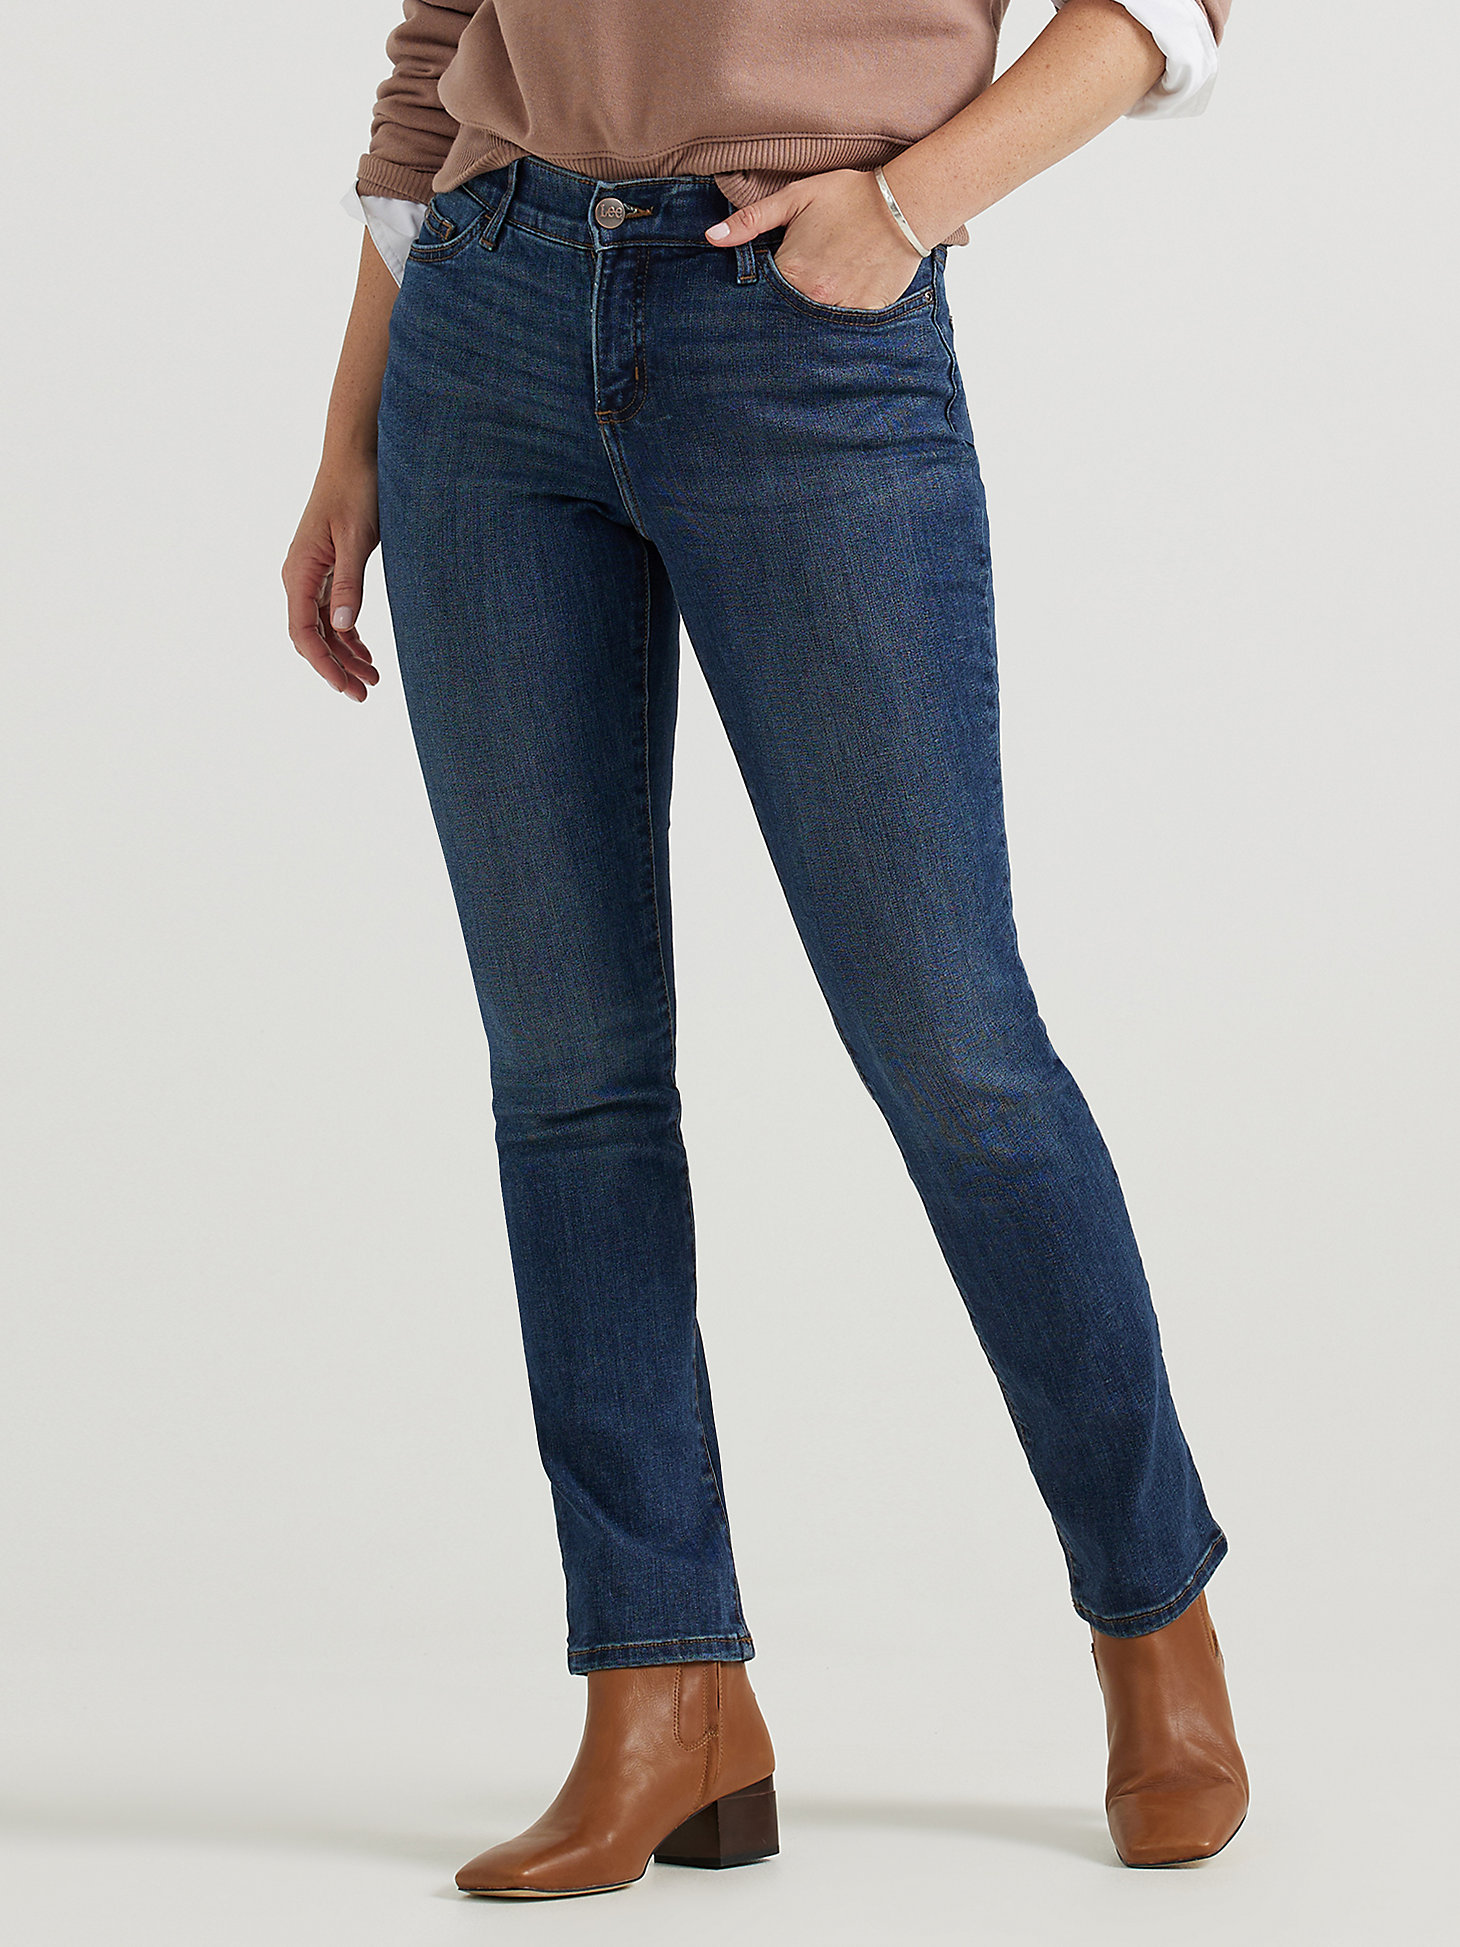 Women's Ultra Lux Comfort with Flex Motion Straight Jean